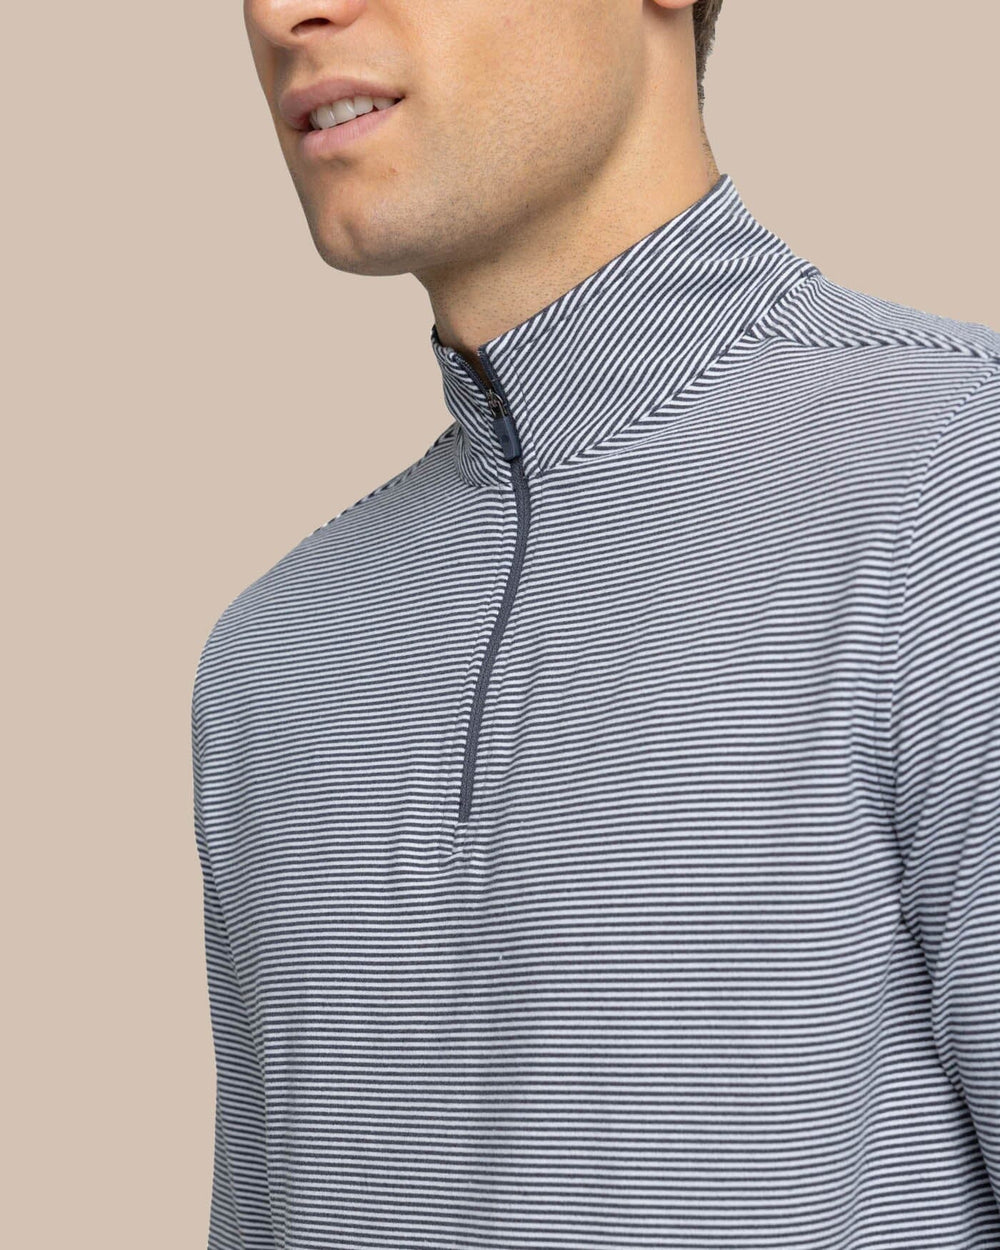 The detail view of the Southern Tide Cruiser Micro-Stripe Heather Quarter Zip by Southern Tide - Heather Black